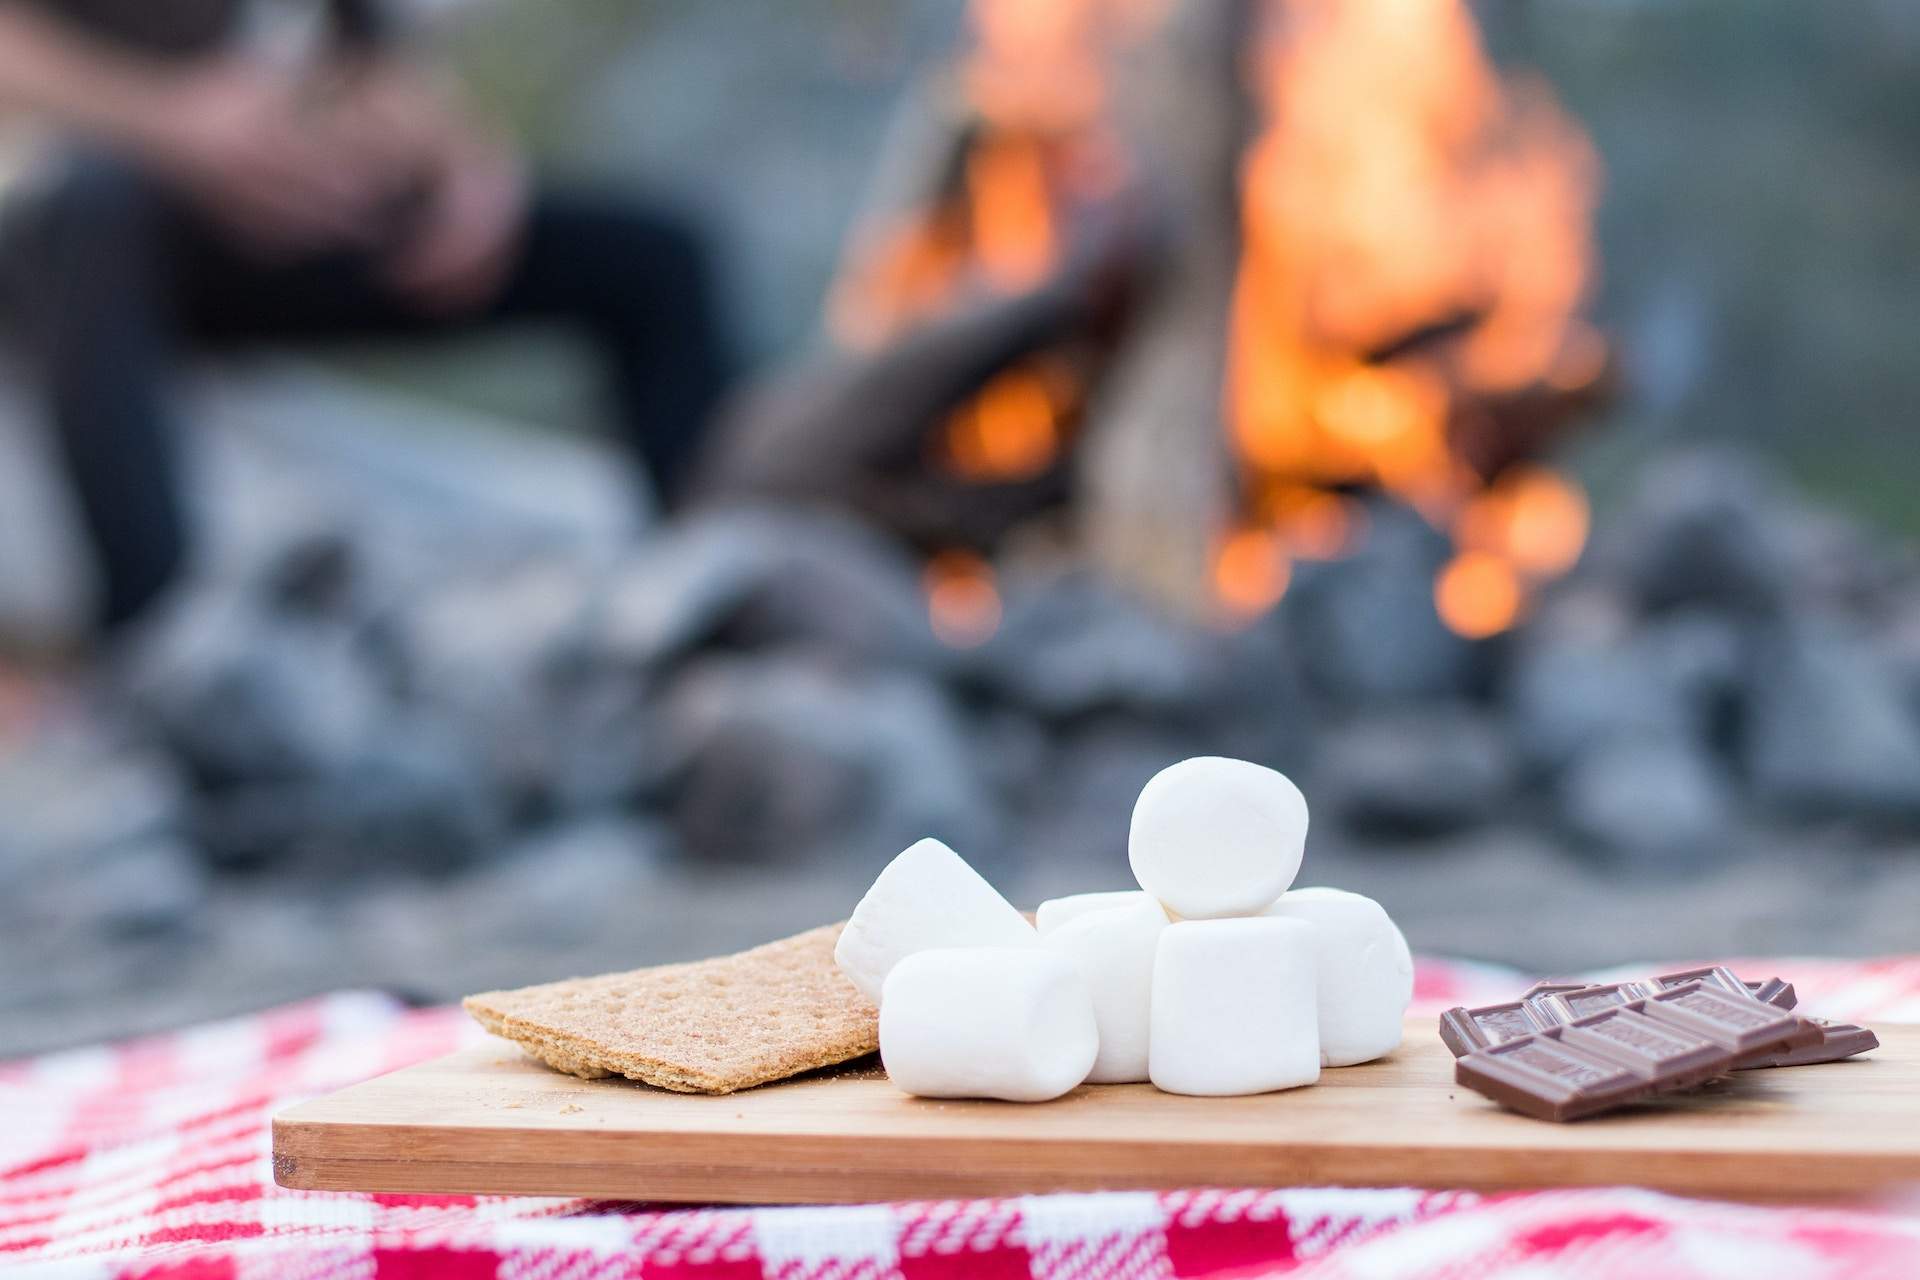 5 Different Ways to Make S’mores